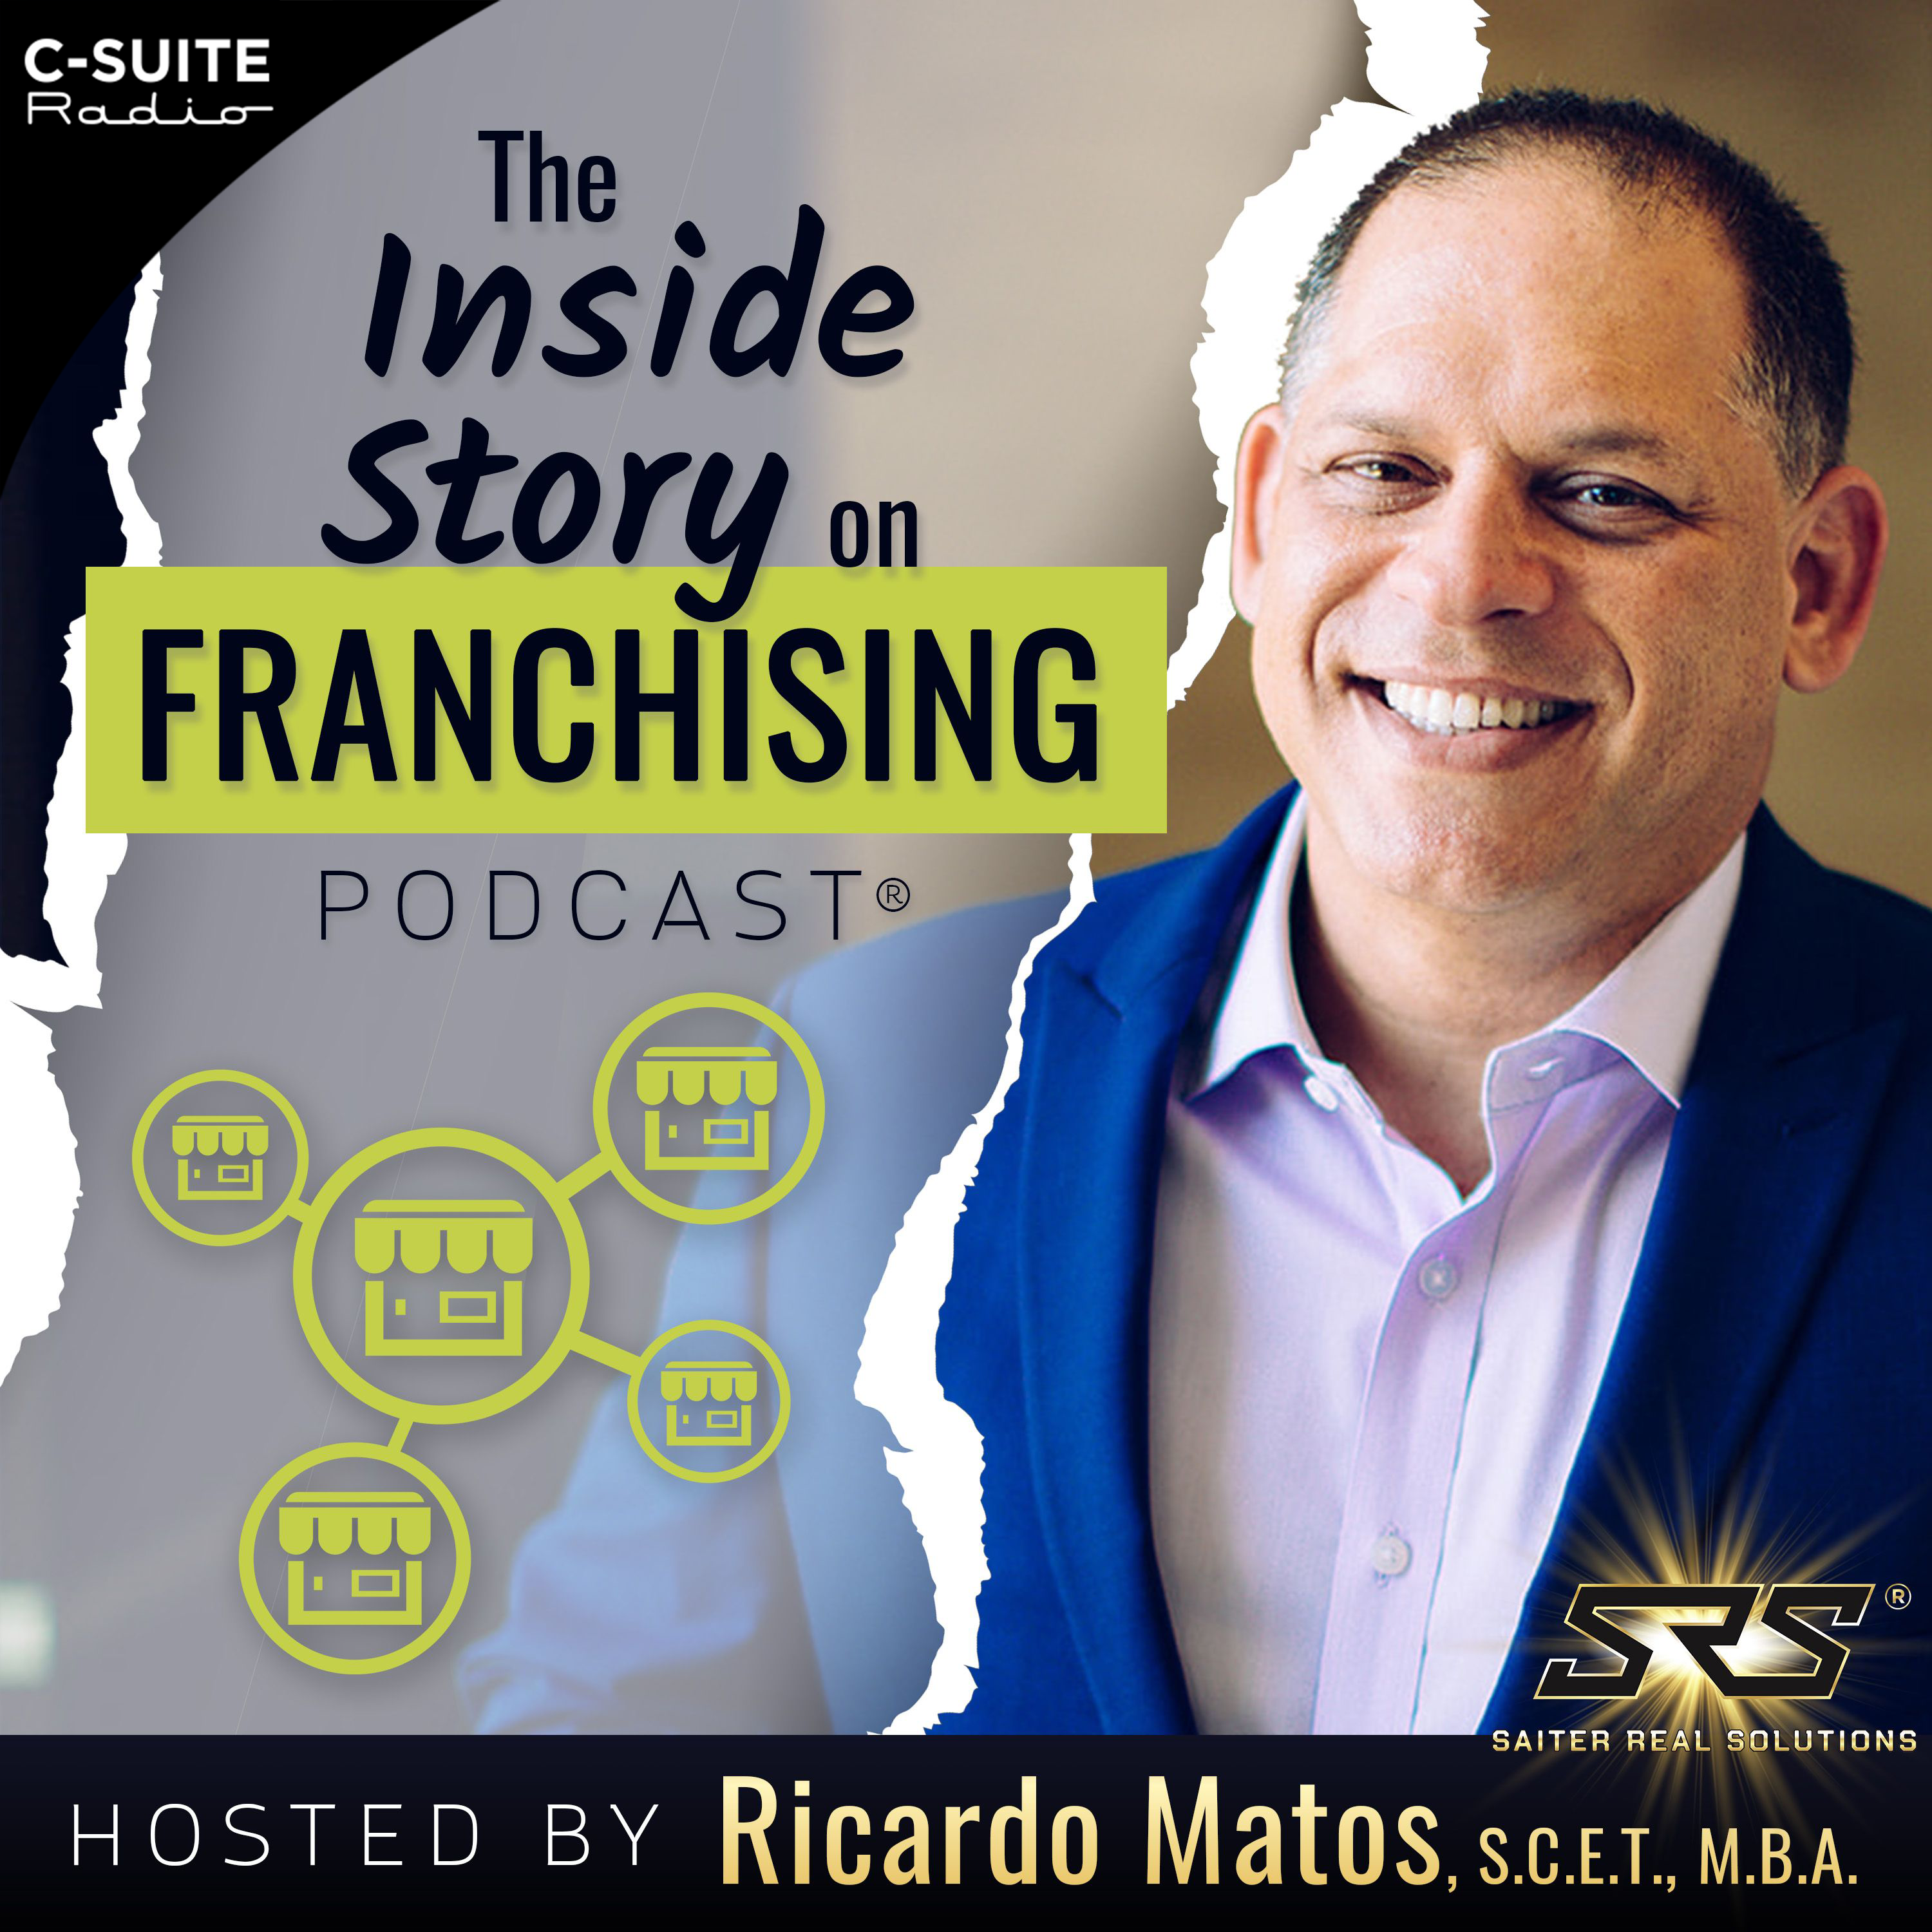 The Inside Story on Franchising